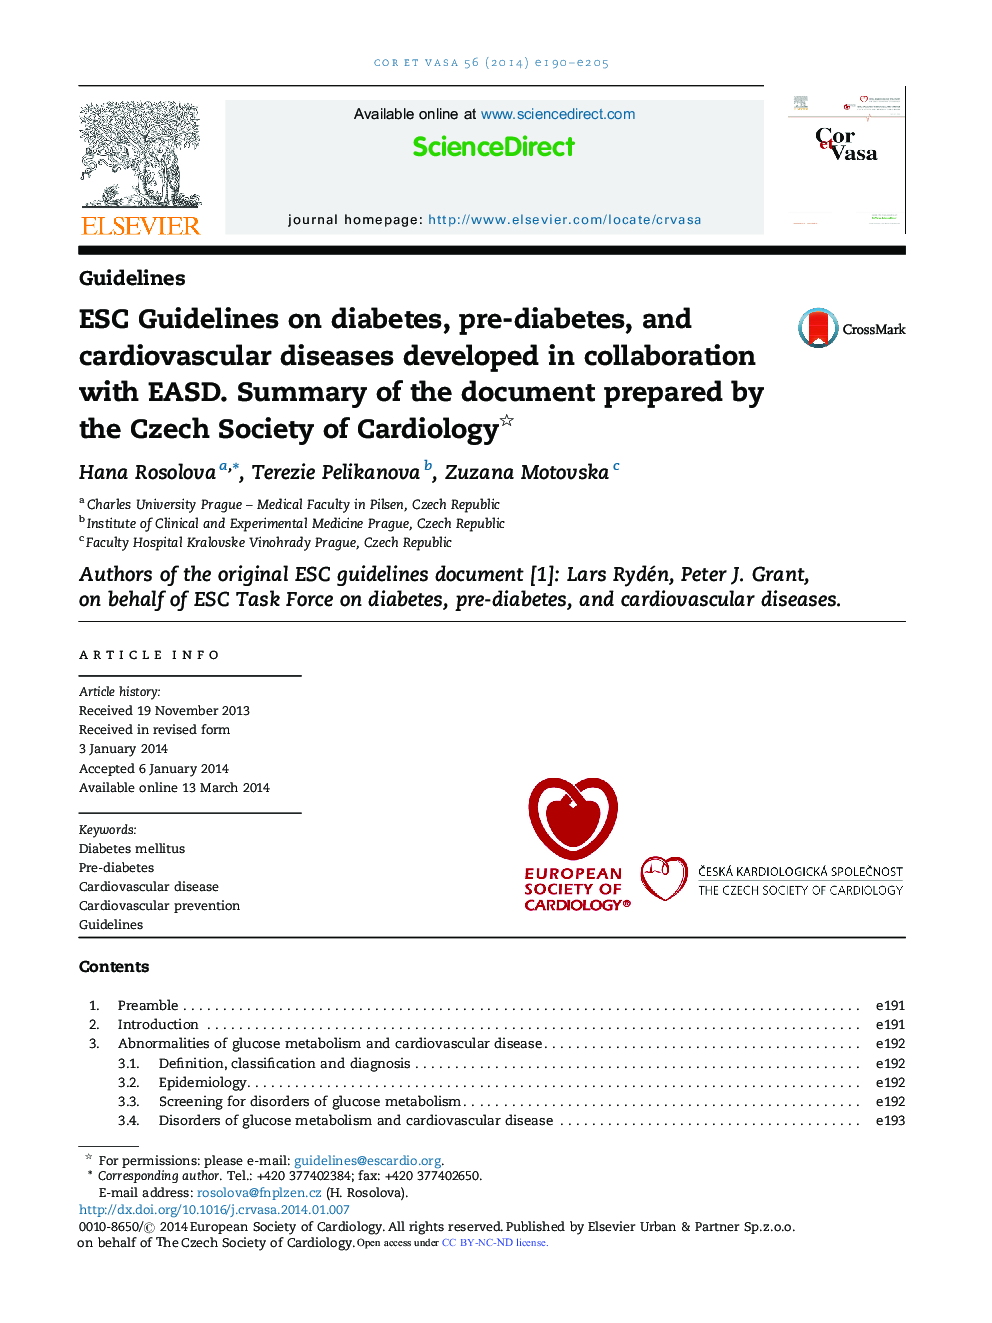 ESC Guidelines on diabetes, pre-diabetes, and cardiovascular diseases developed in collaboration with EASD. Summary of the document prepared by the Czech Society of Cardiology